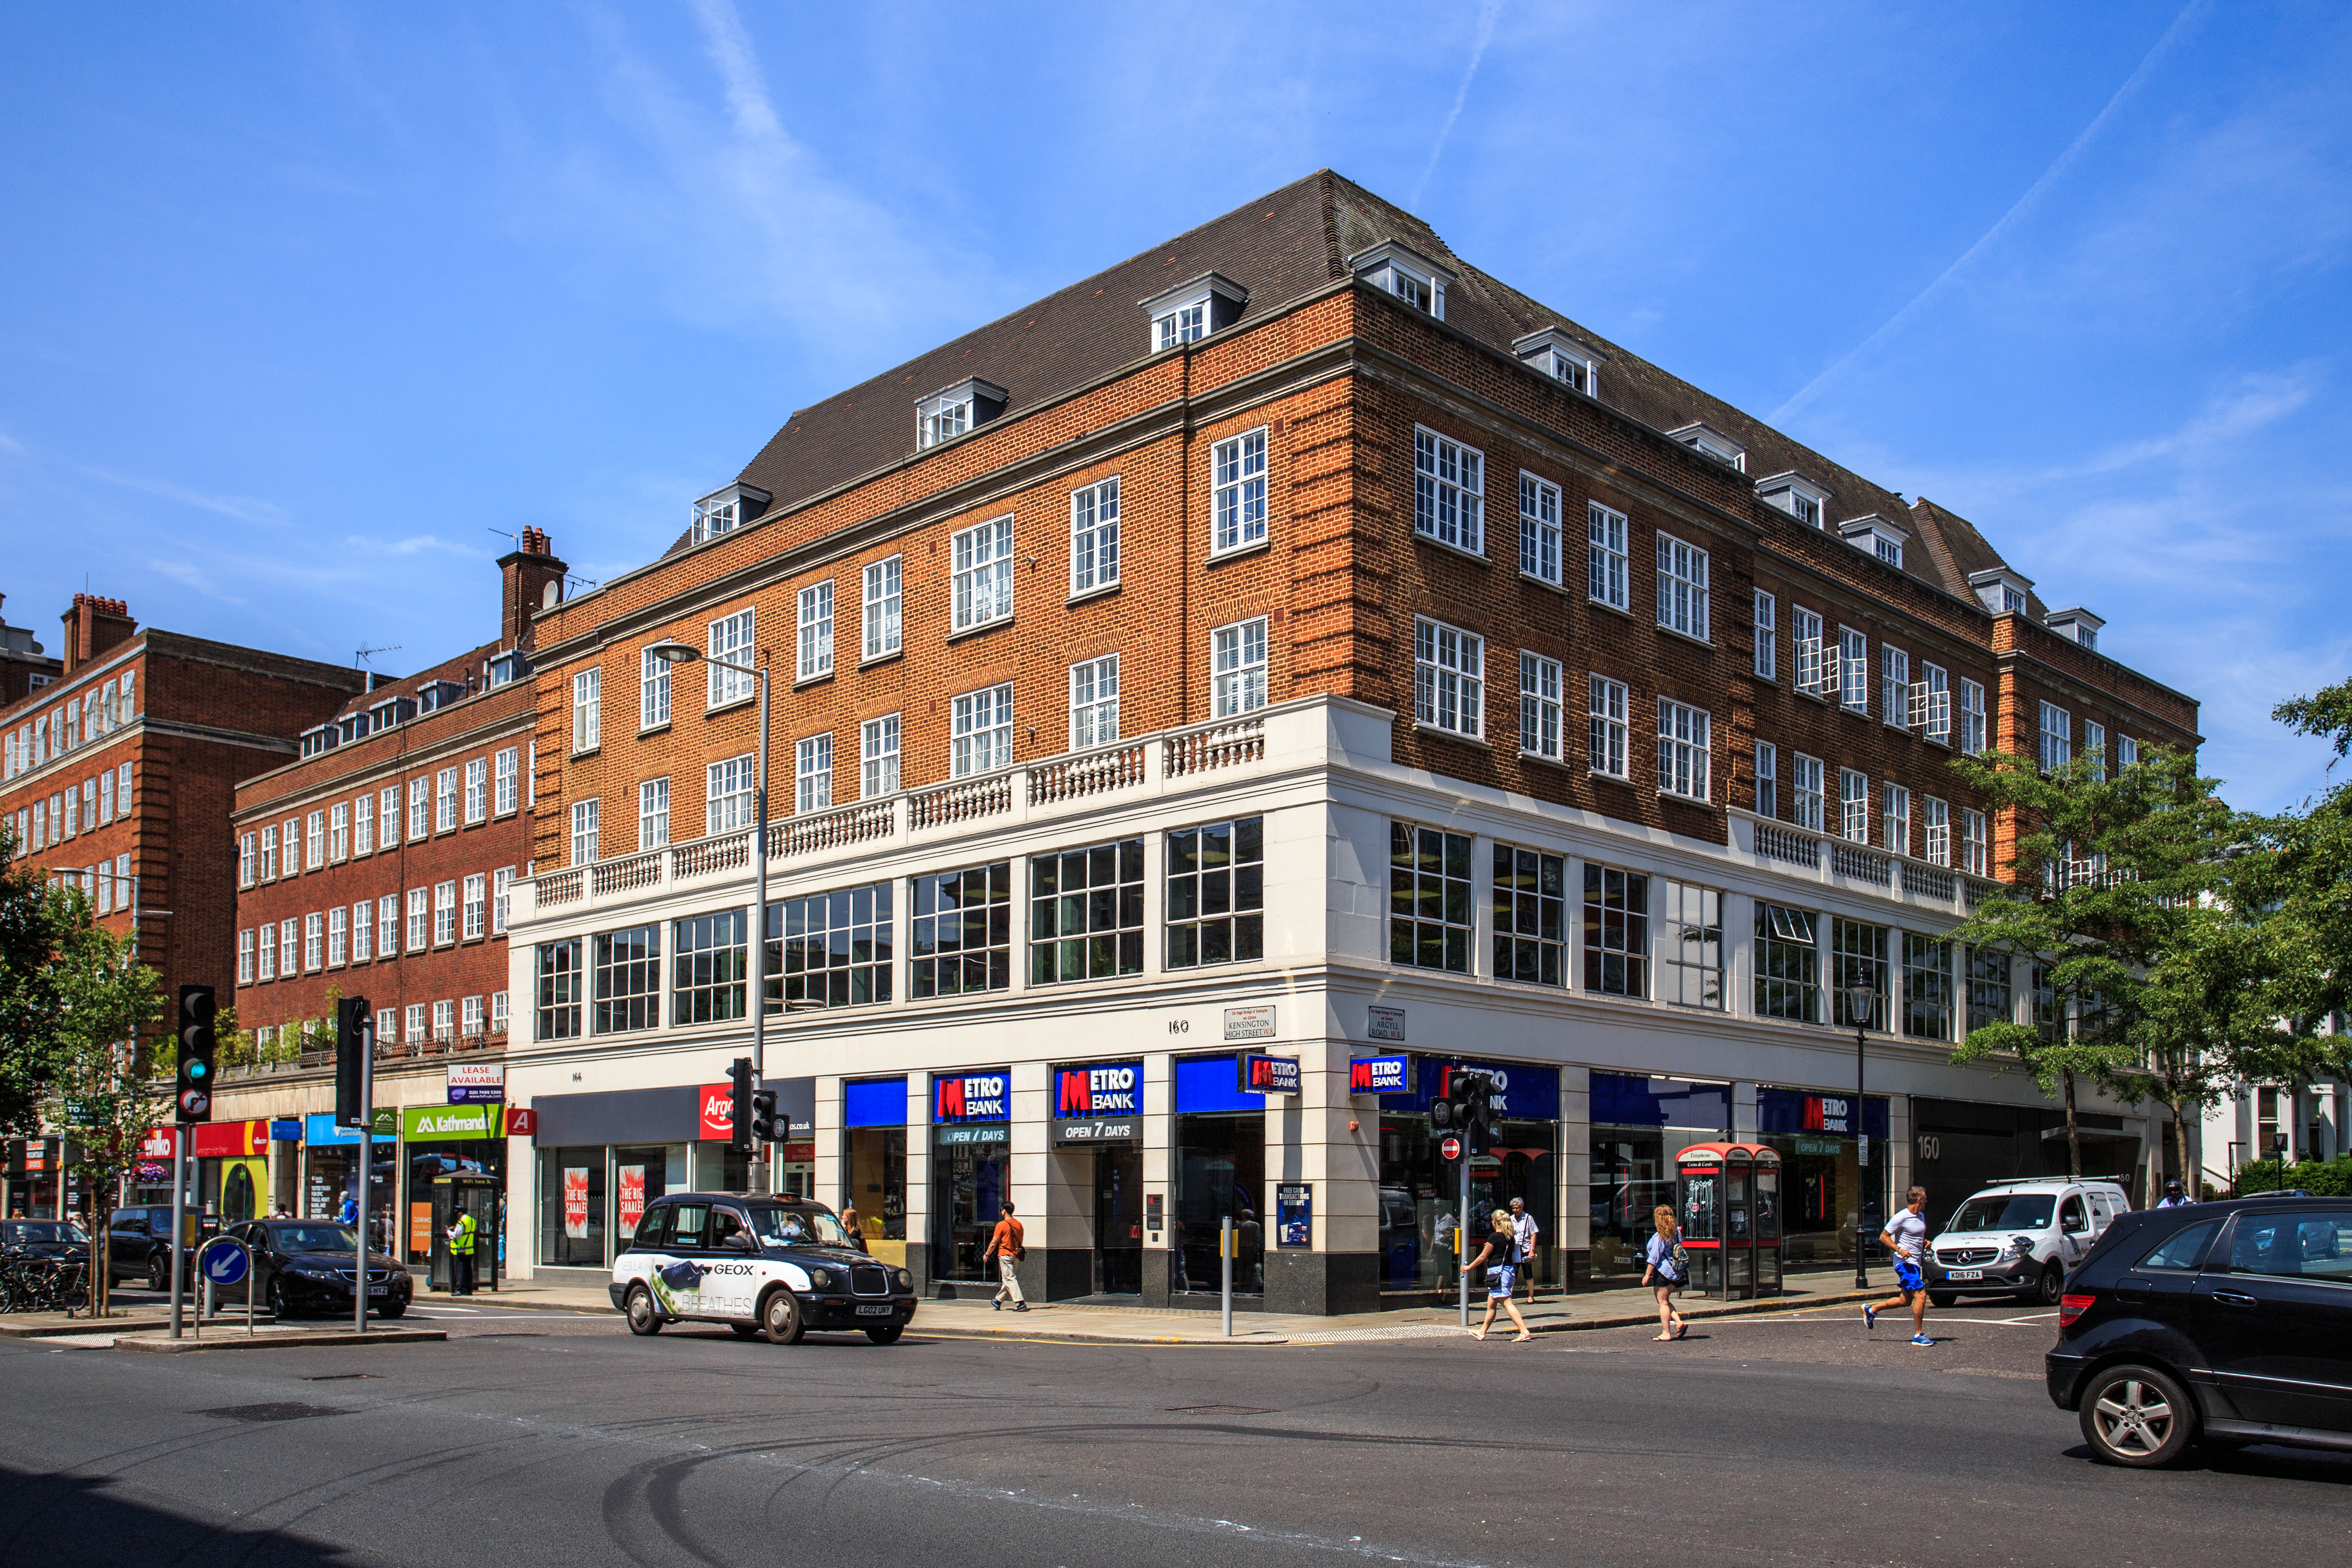 Disposal of a prime London freehold retail and office investment